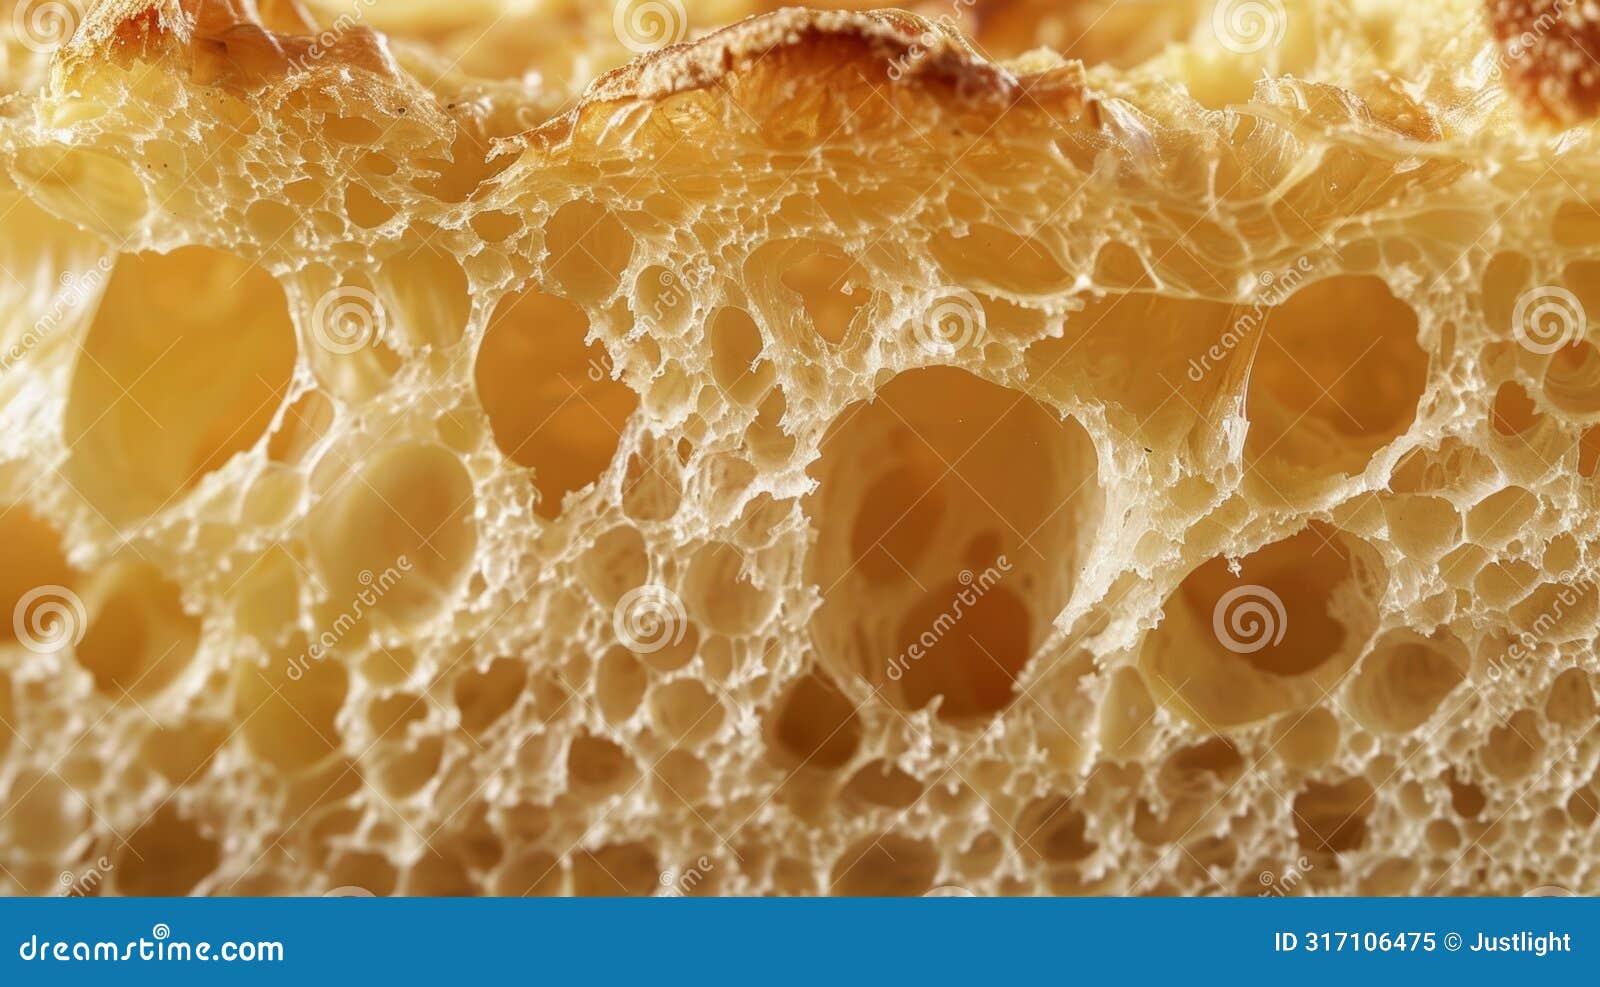 a closeup of a cross section of a loaf of bread revealing its airy holey structure and golden crispy crust